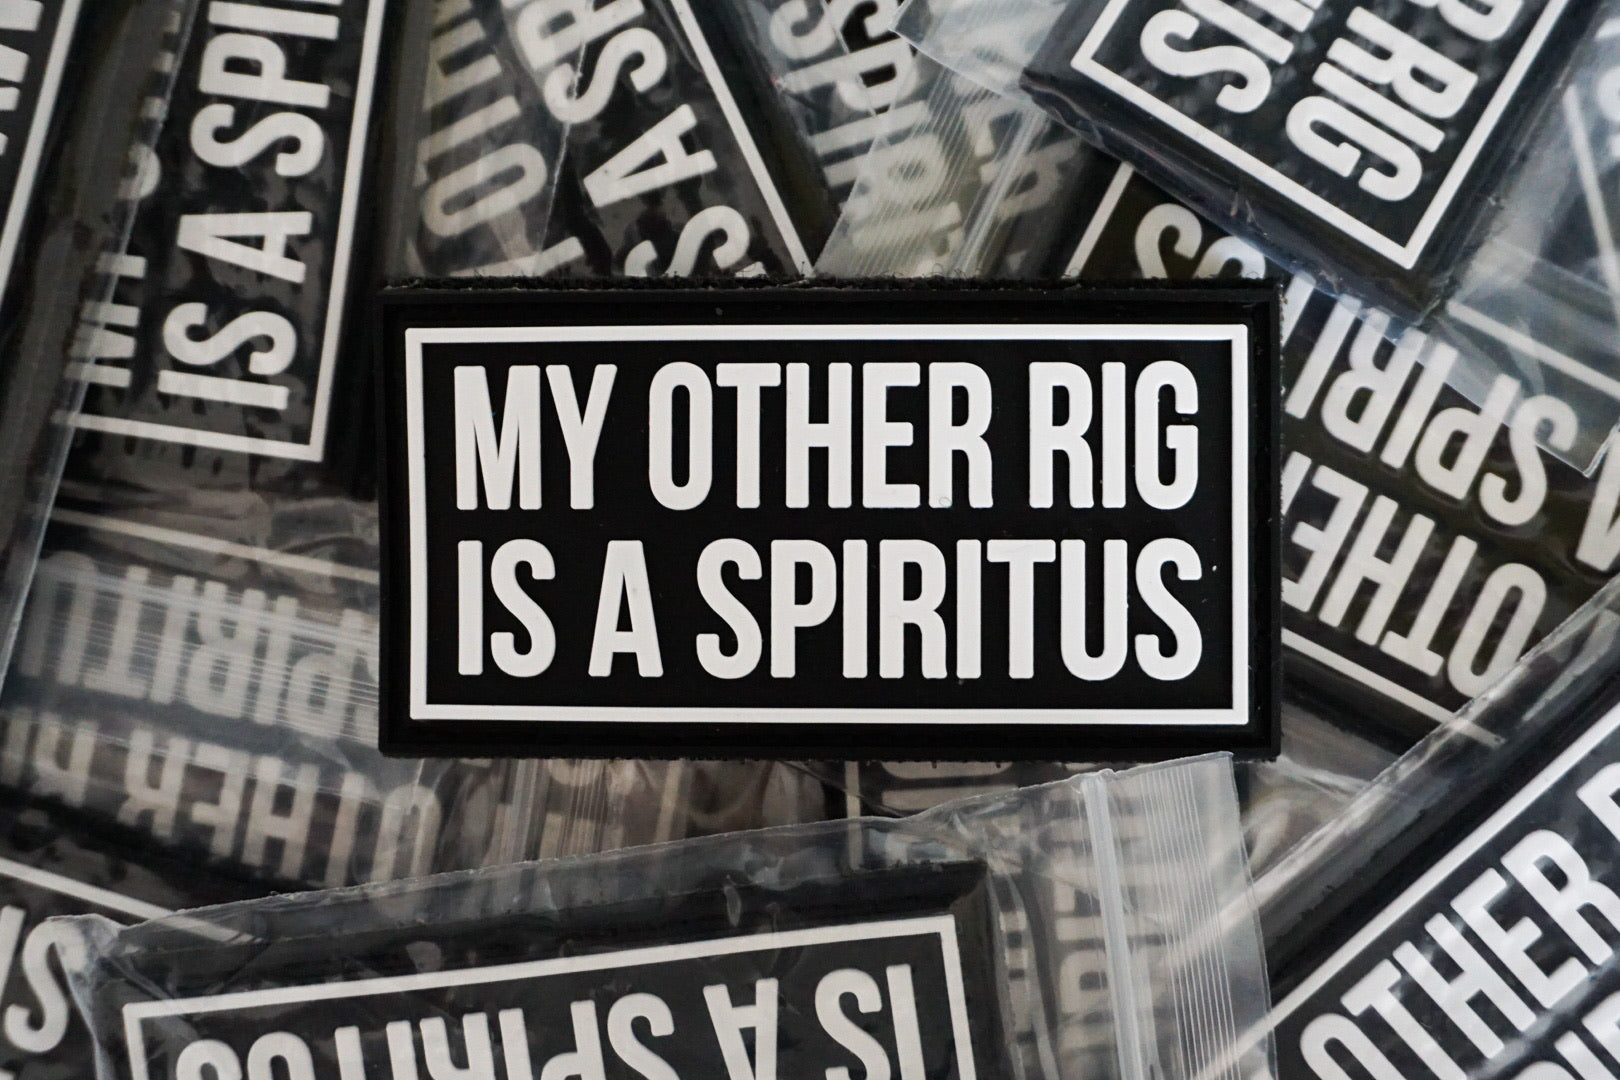 My Other rig is a Spiritus